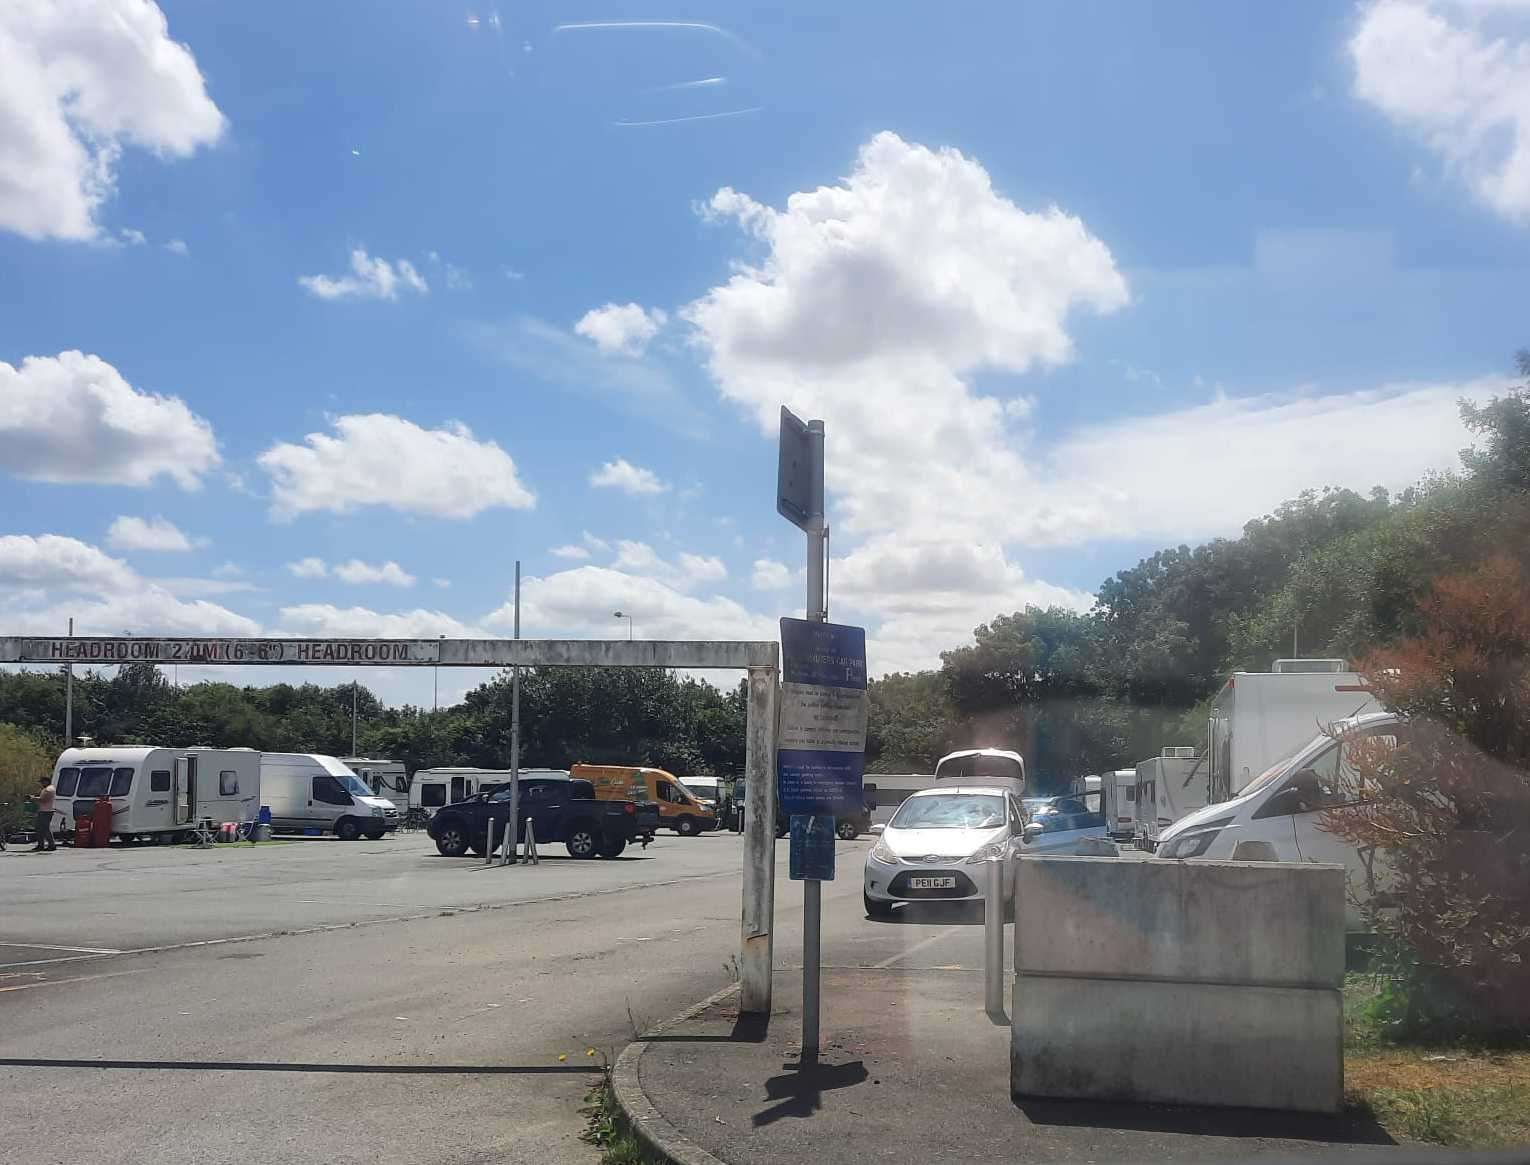 Wigmore coach park was intended to be a temporary site for three months